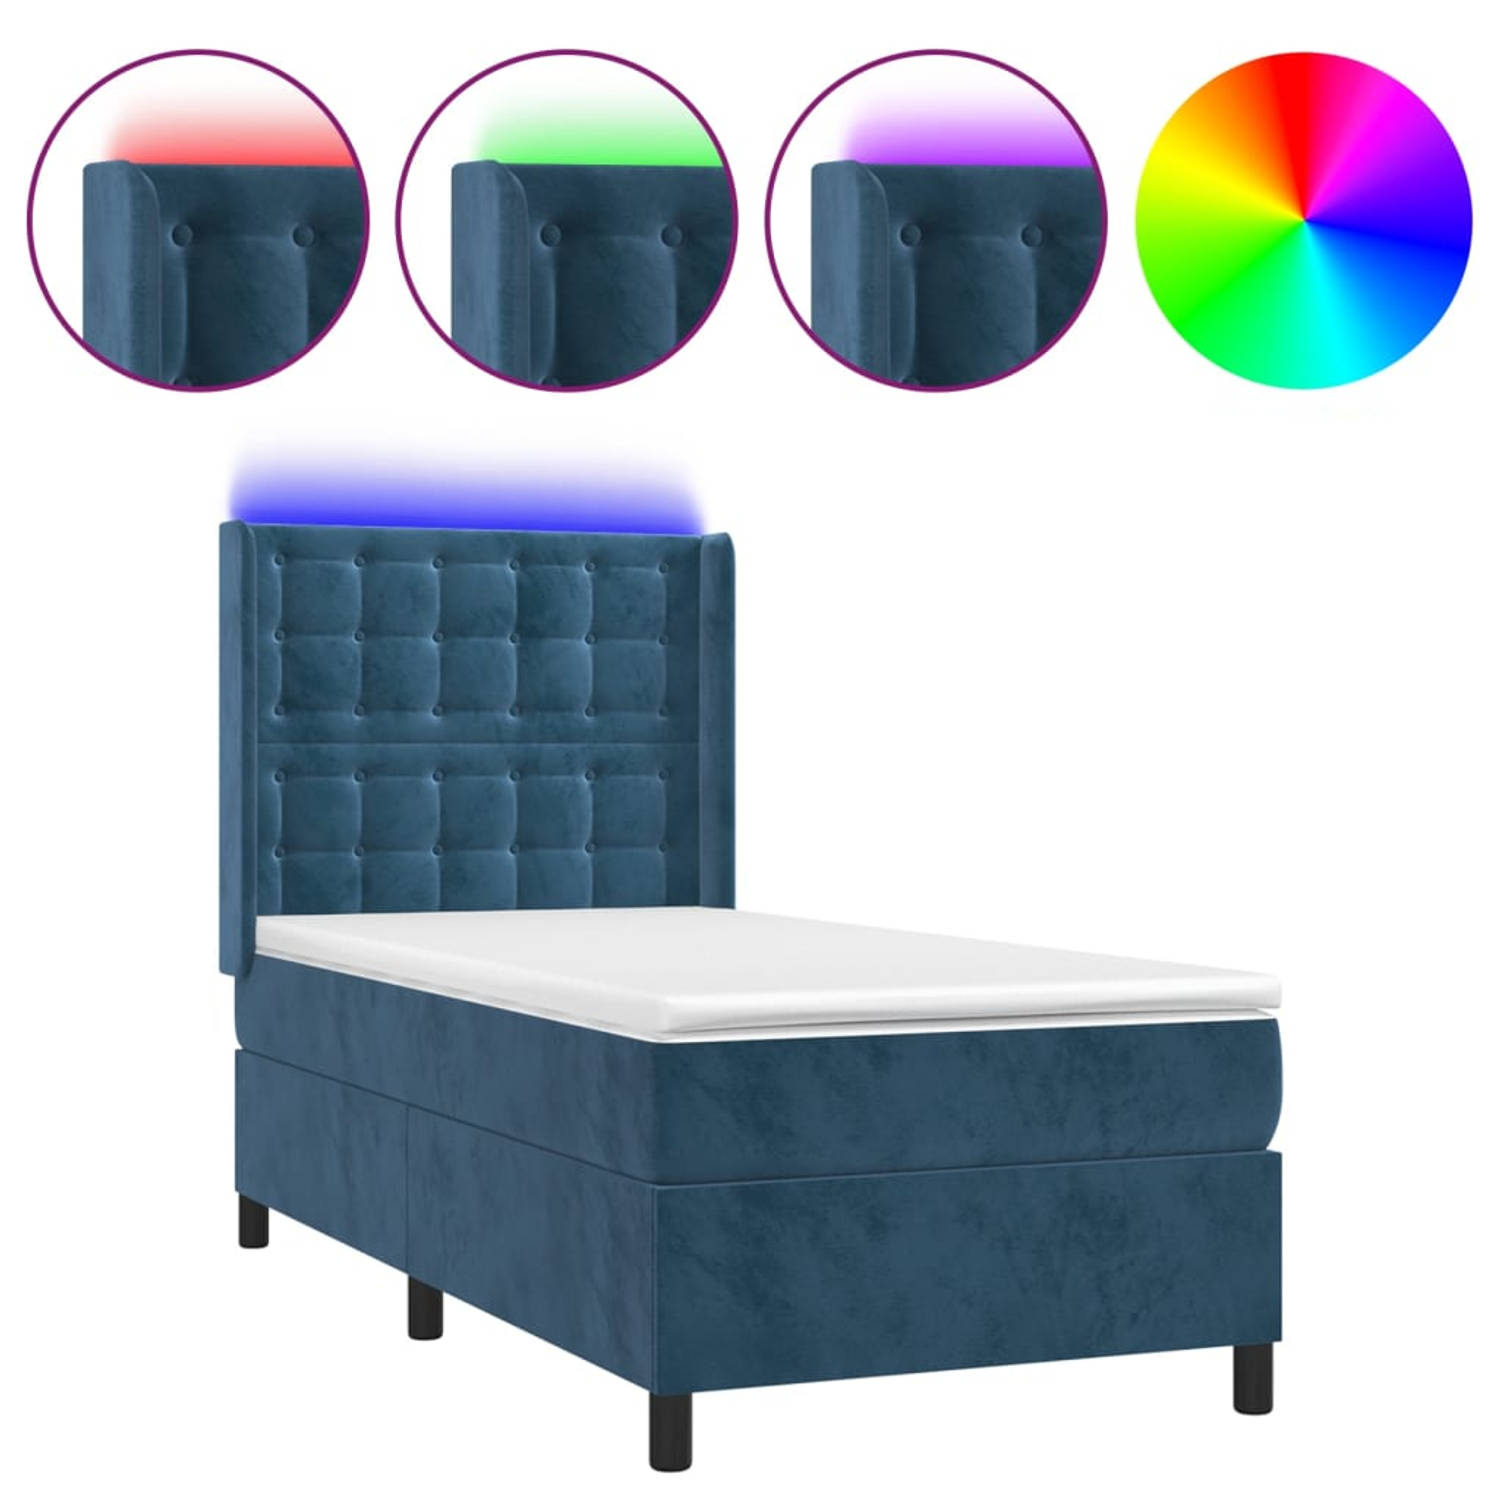 The Living Store Boxspring Bed - Donkerblauw Fluweel - 203 x 93 x 118/128 cm - Incl - Matras en LED